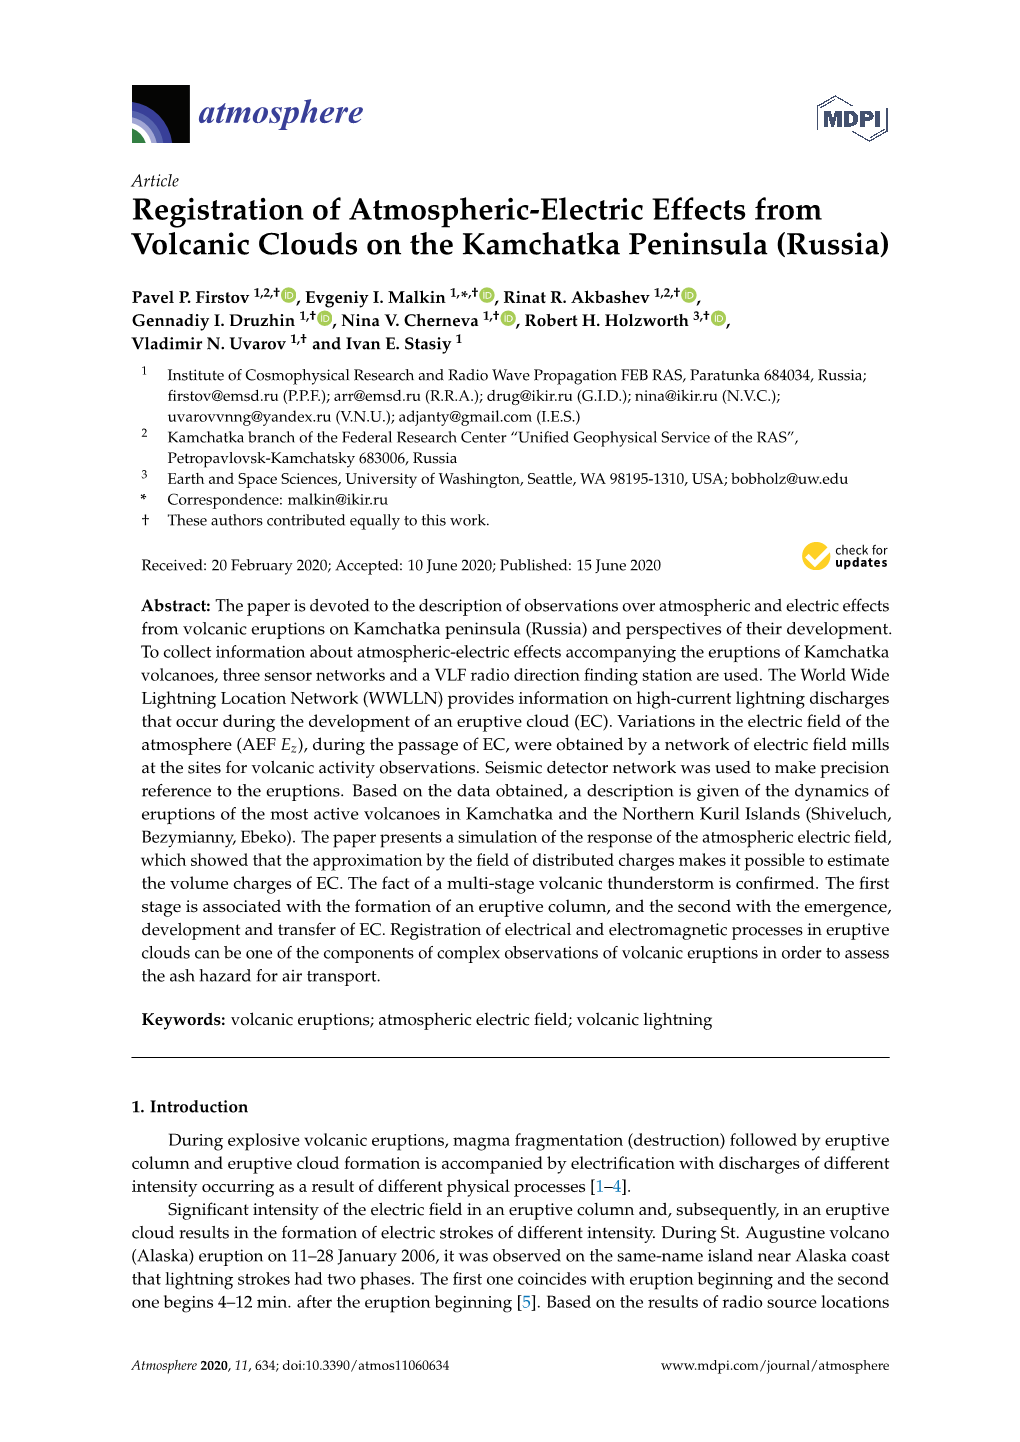 Registration of Atmospheric-Electric Effects from Volcanic Clouds on the Kamchatka Peninsula (Russia)